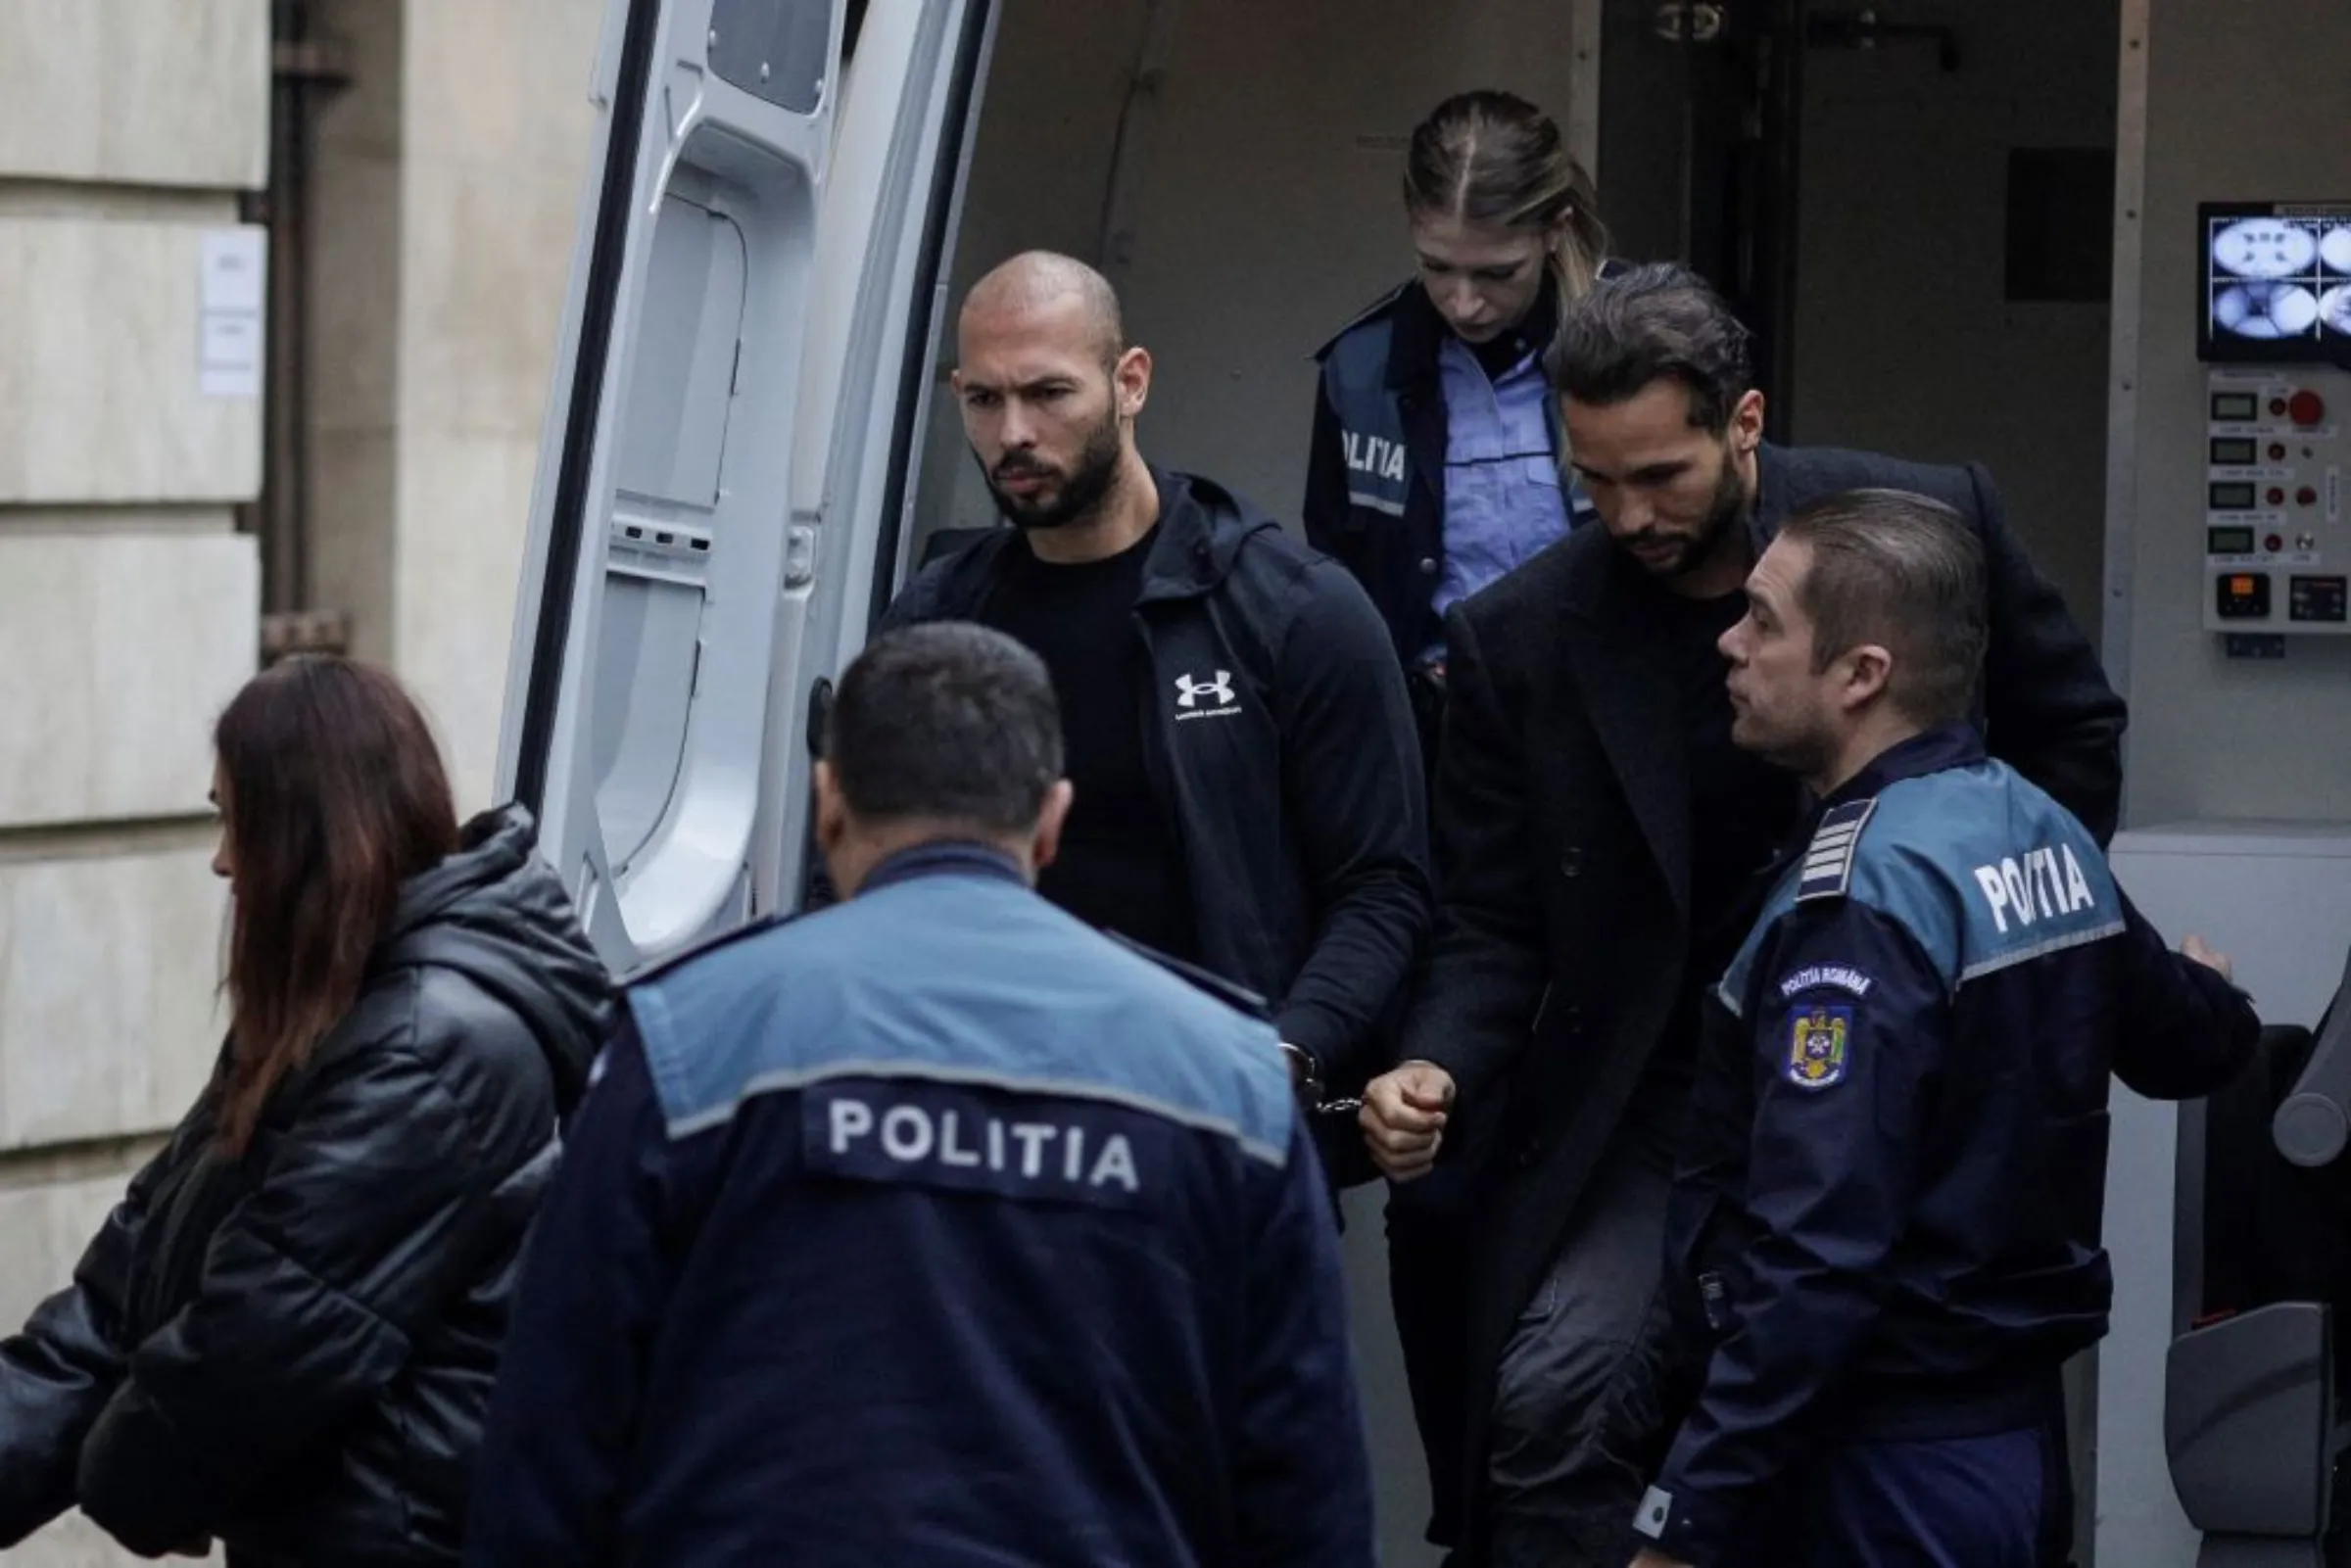 Andrew Tate and his brother Tristan are escorted by police officers outside the headquarters of the Bucharest Court of Appeal, in Bucharest, Romania, January 10, 2023. Inquam Photos/Octav Ganea via REUTERS